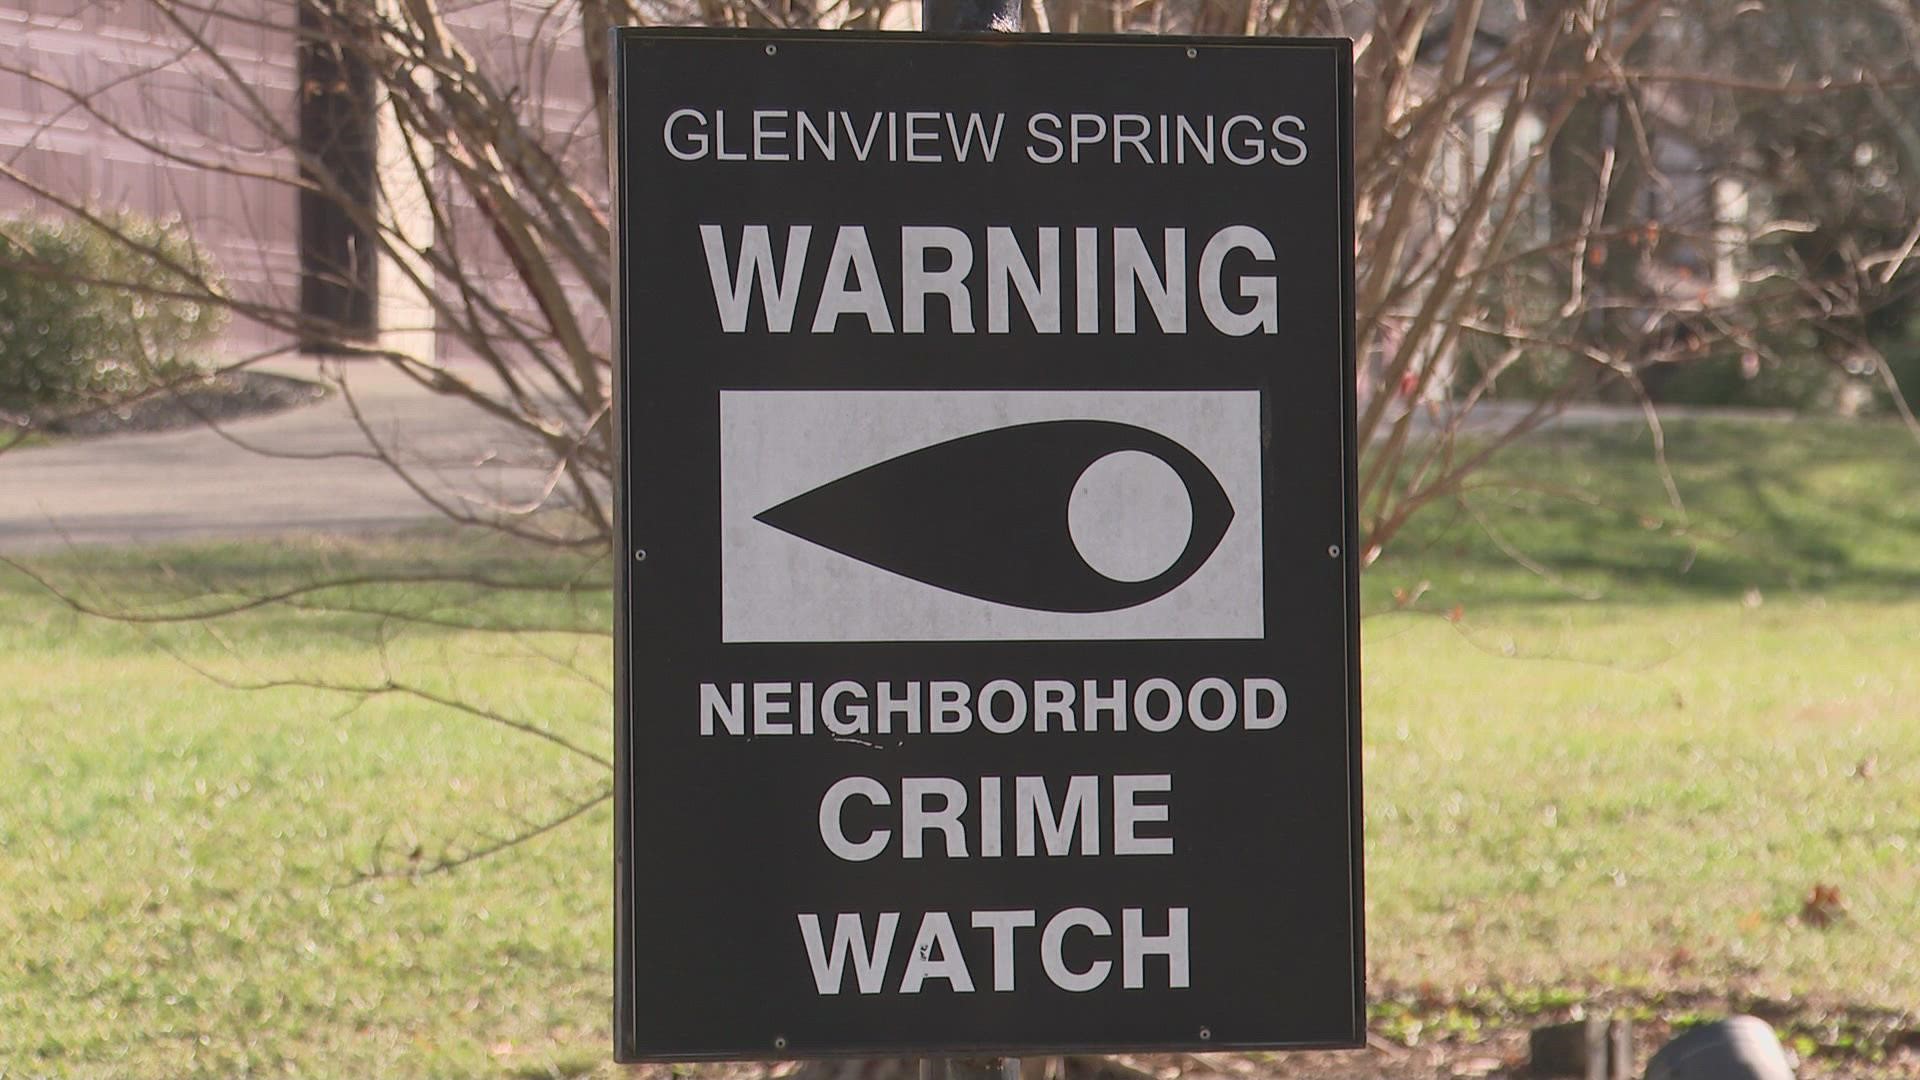 After several disturbances and calls to the police, Glenview Springs residents feel they now have to take matters into their own hands.